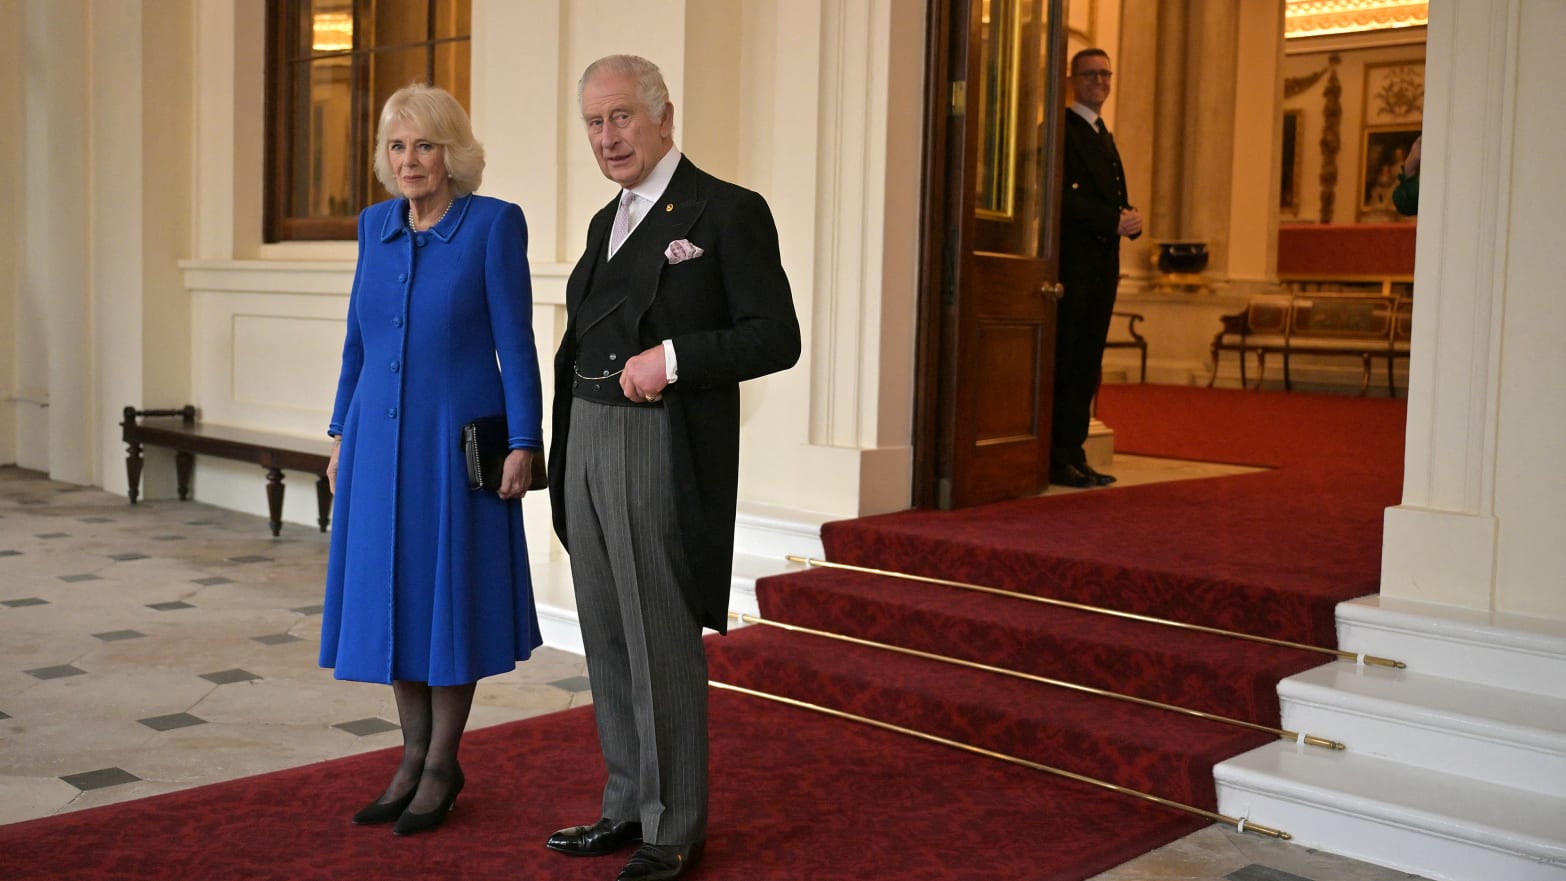 King Charles III and his wife, Queen Camilla.